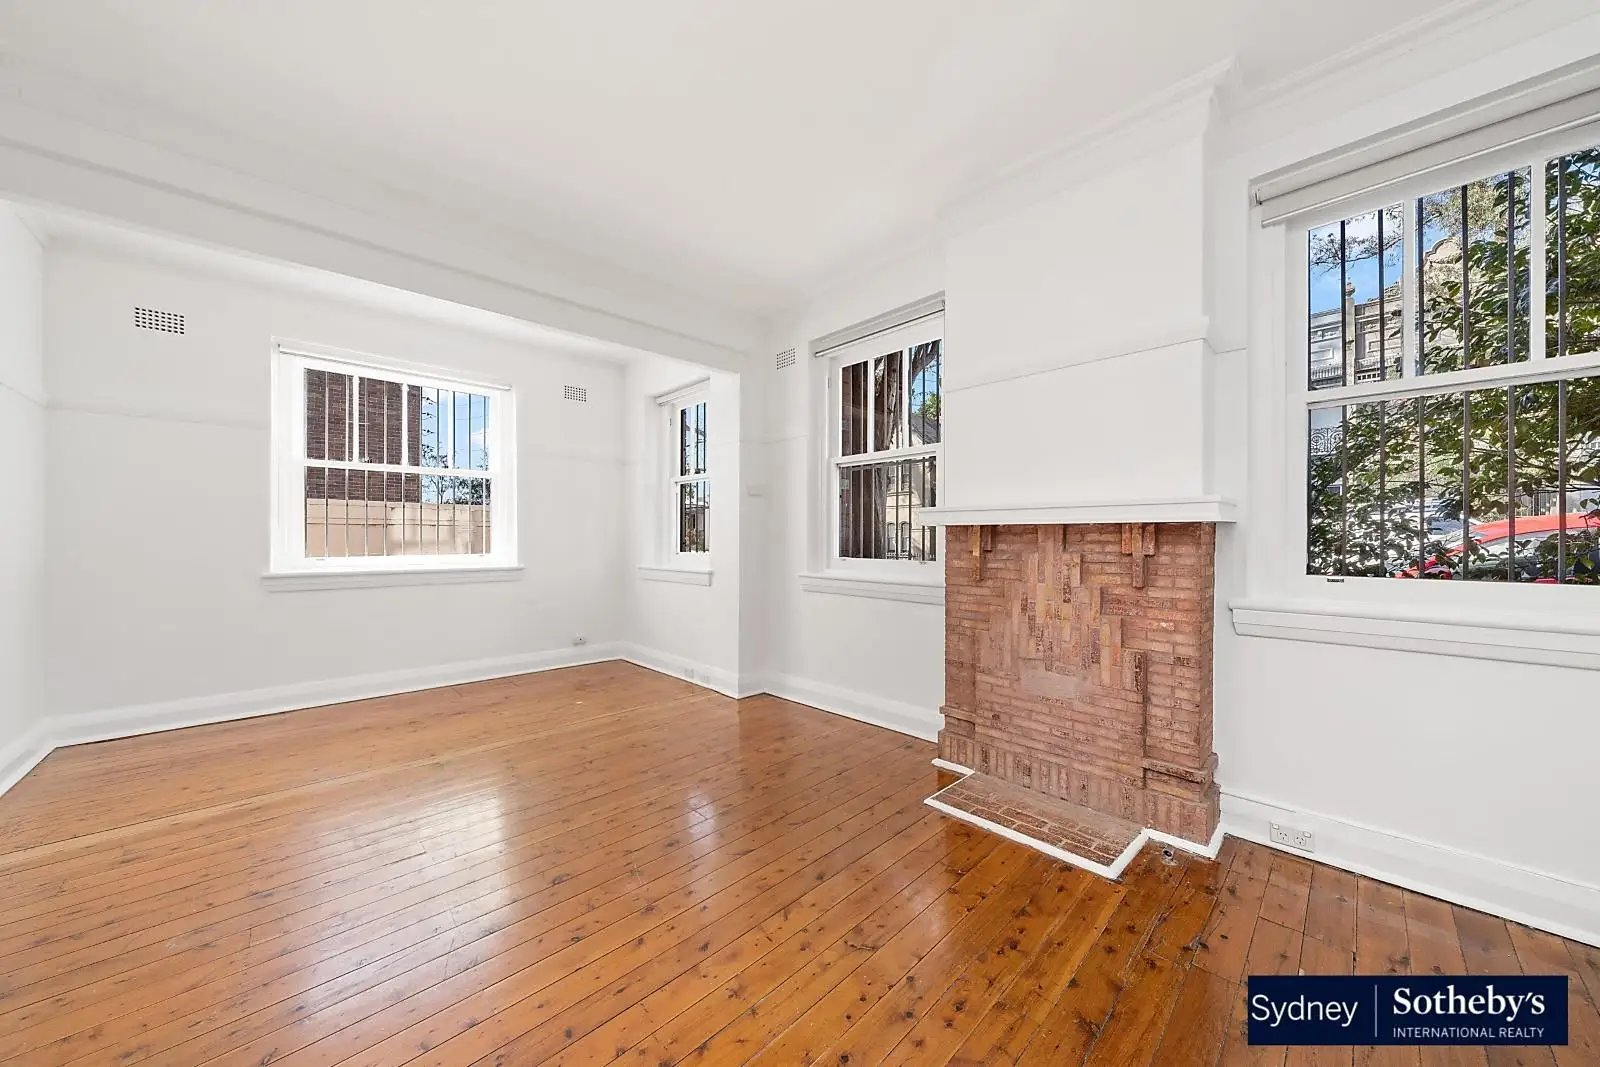 1/28 Junction Street, Woollahra Leased by Sydney Sotheby's International Realty - image 1